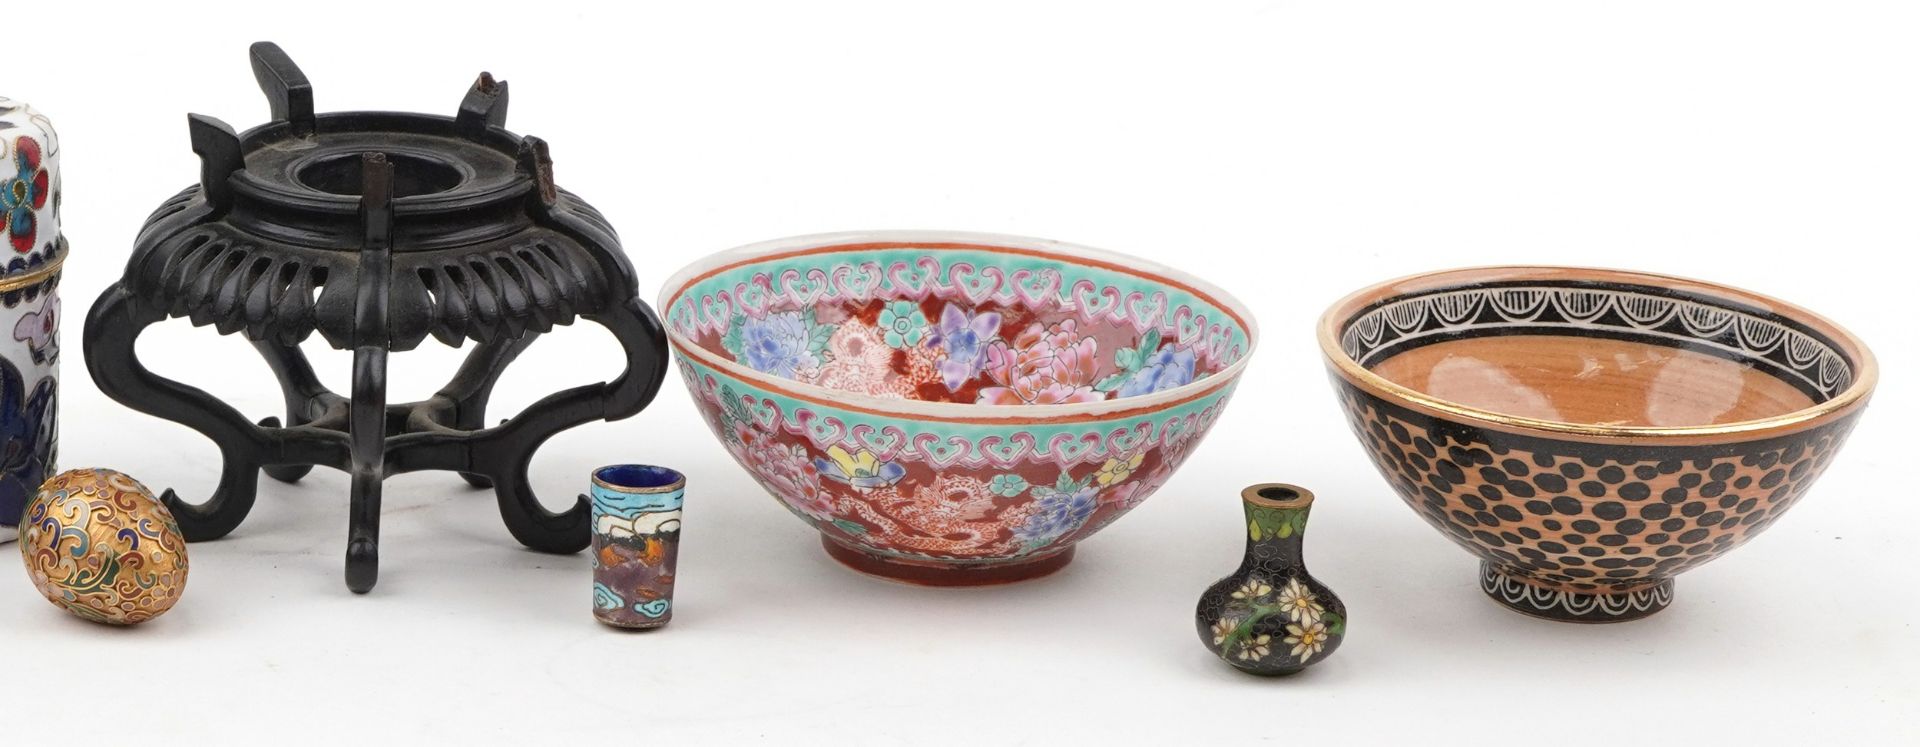 Selection of Chinese items including hand painted porcelain bowl, wooden stands, cloisonne pots - Image 3 of 4